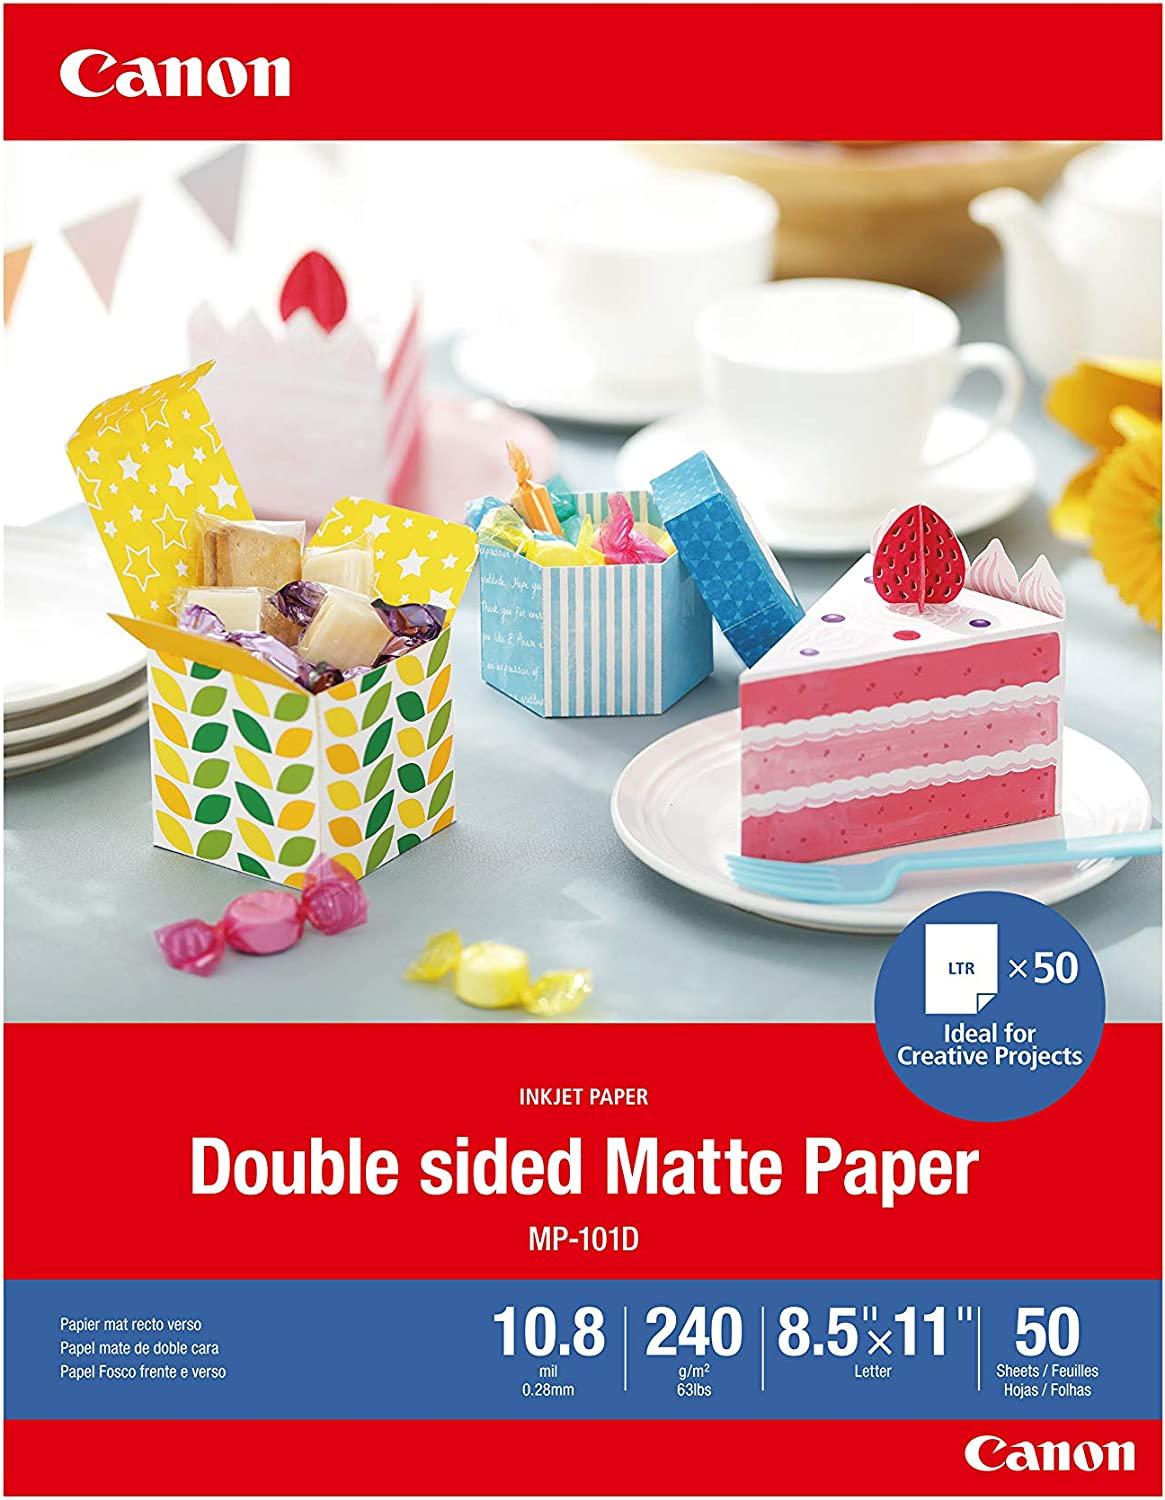 Canon 8.5" x 11" Letter-Size Double Sided Matte Photo Paper/50 Sheets – Perfect for Arts and Crafts (4076C004)